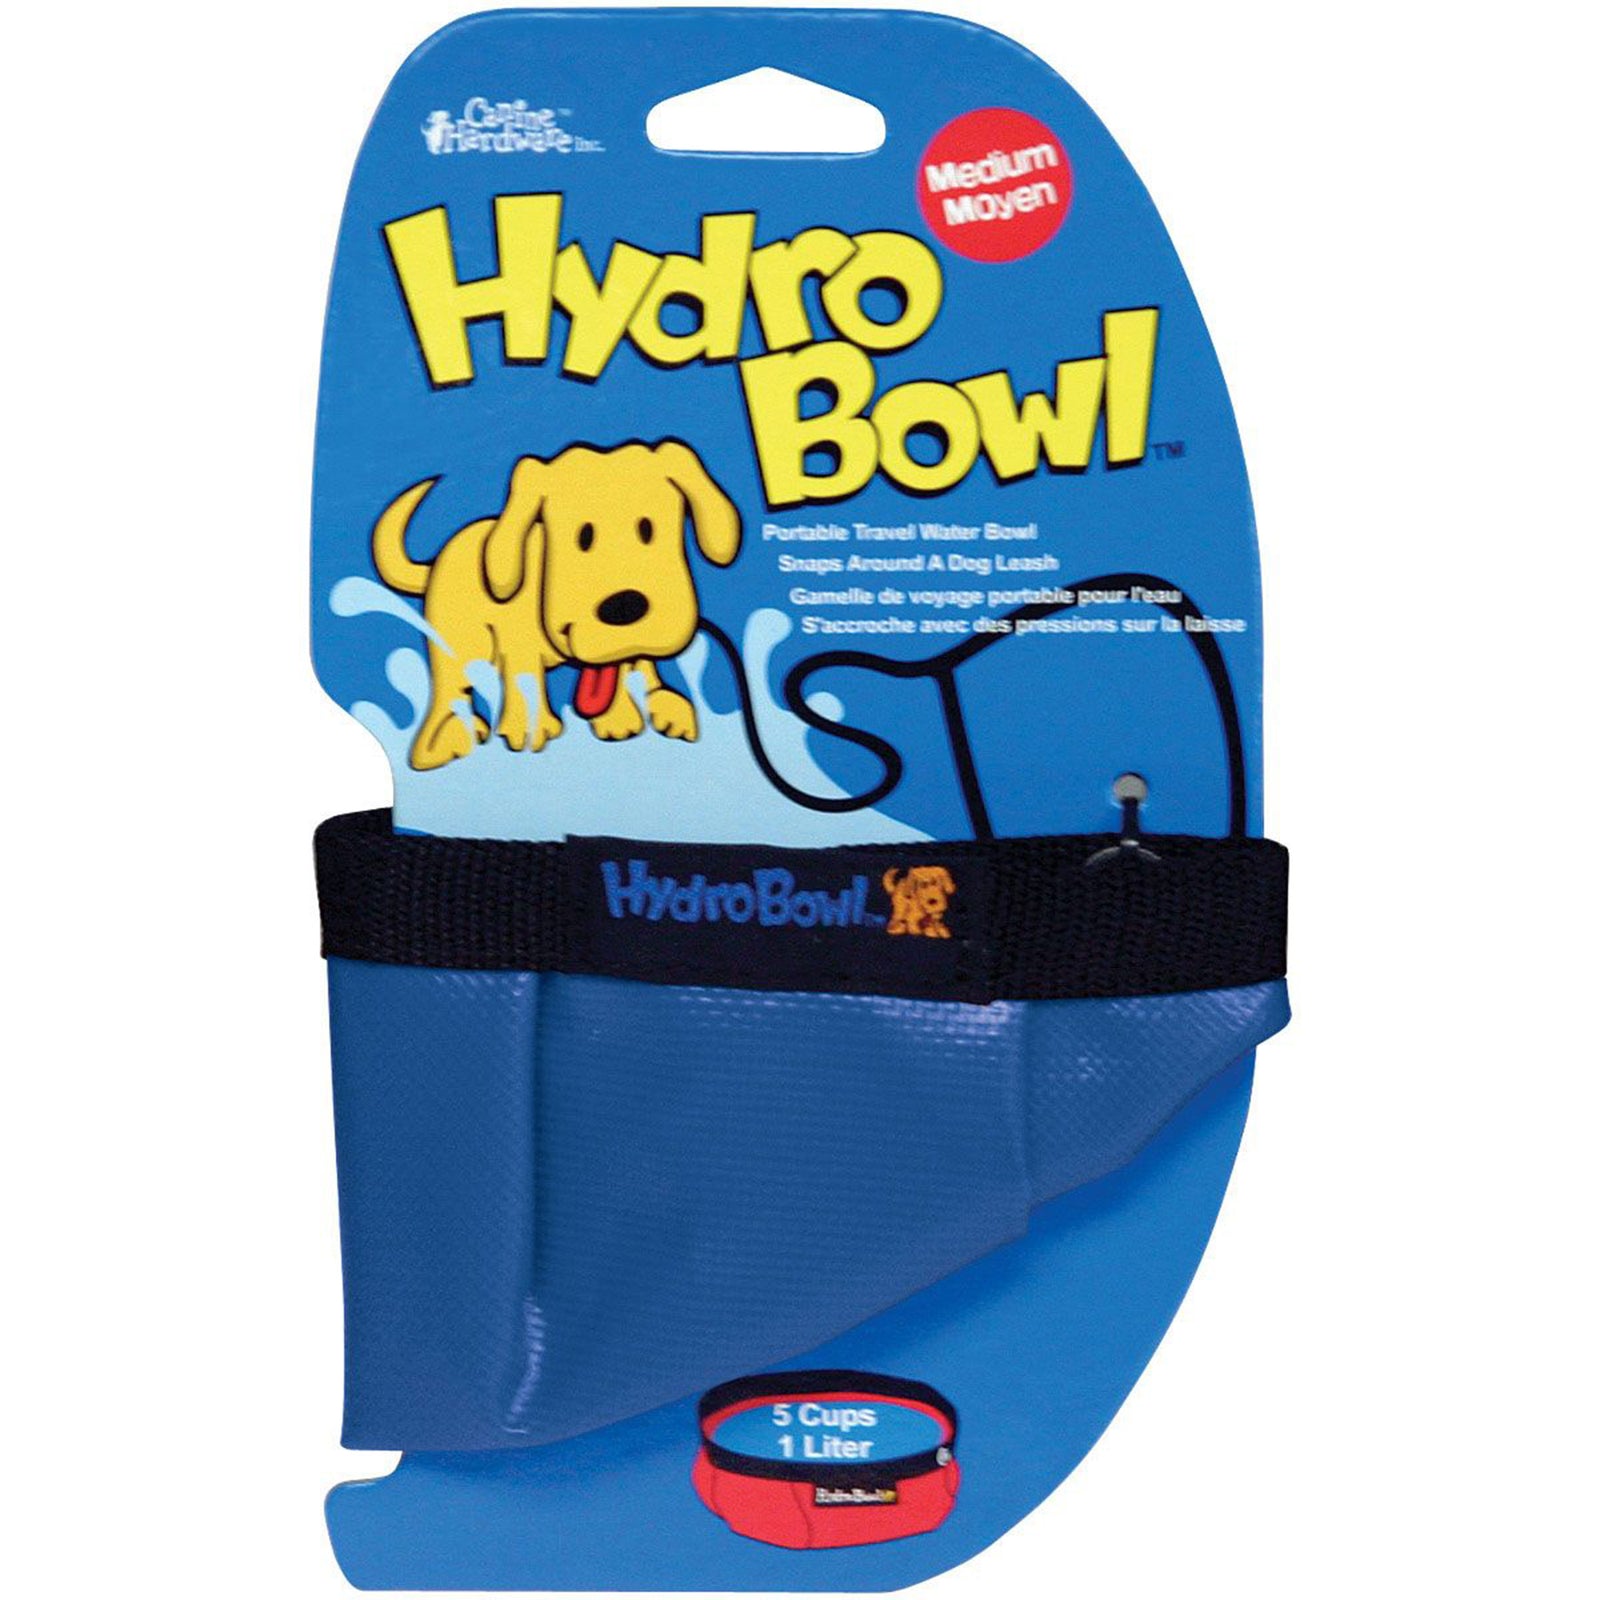 the hydro dog bowl shown in blue still in its packaging, which has a cute dog on the label